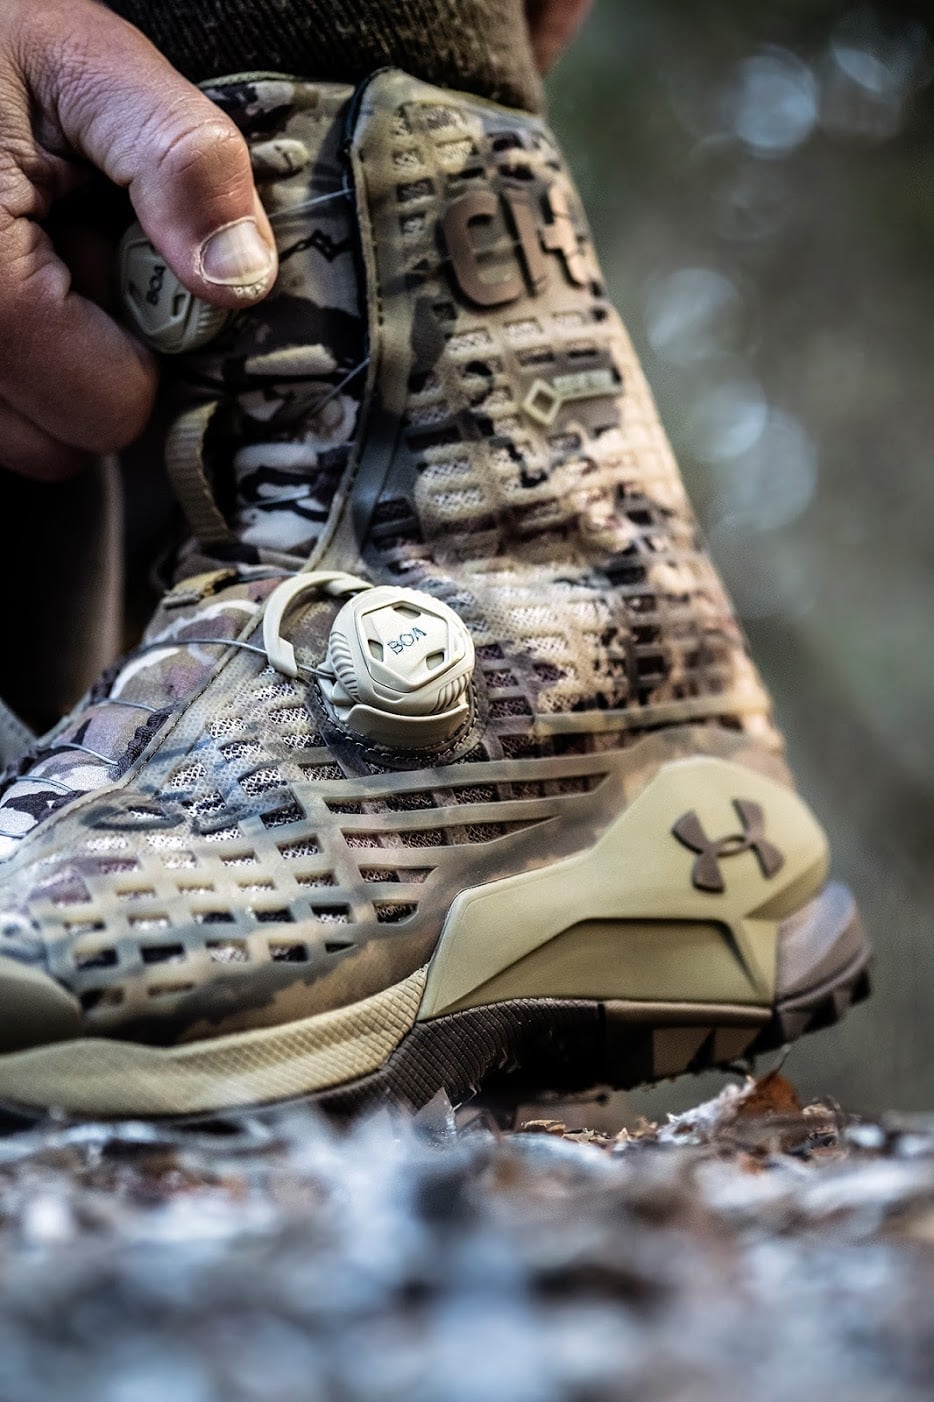 CH1 GTX Hunting Boots By Under Armour And Cam Hanes | Men's Gear